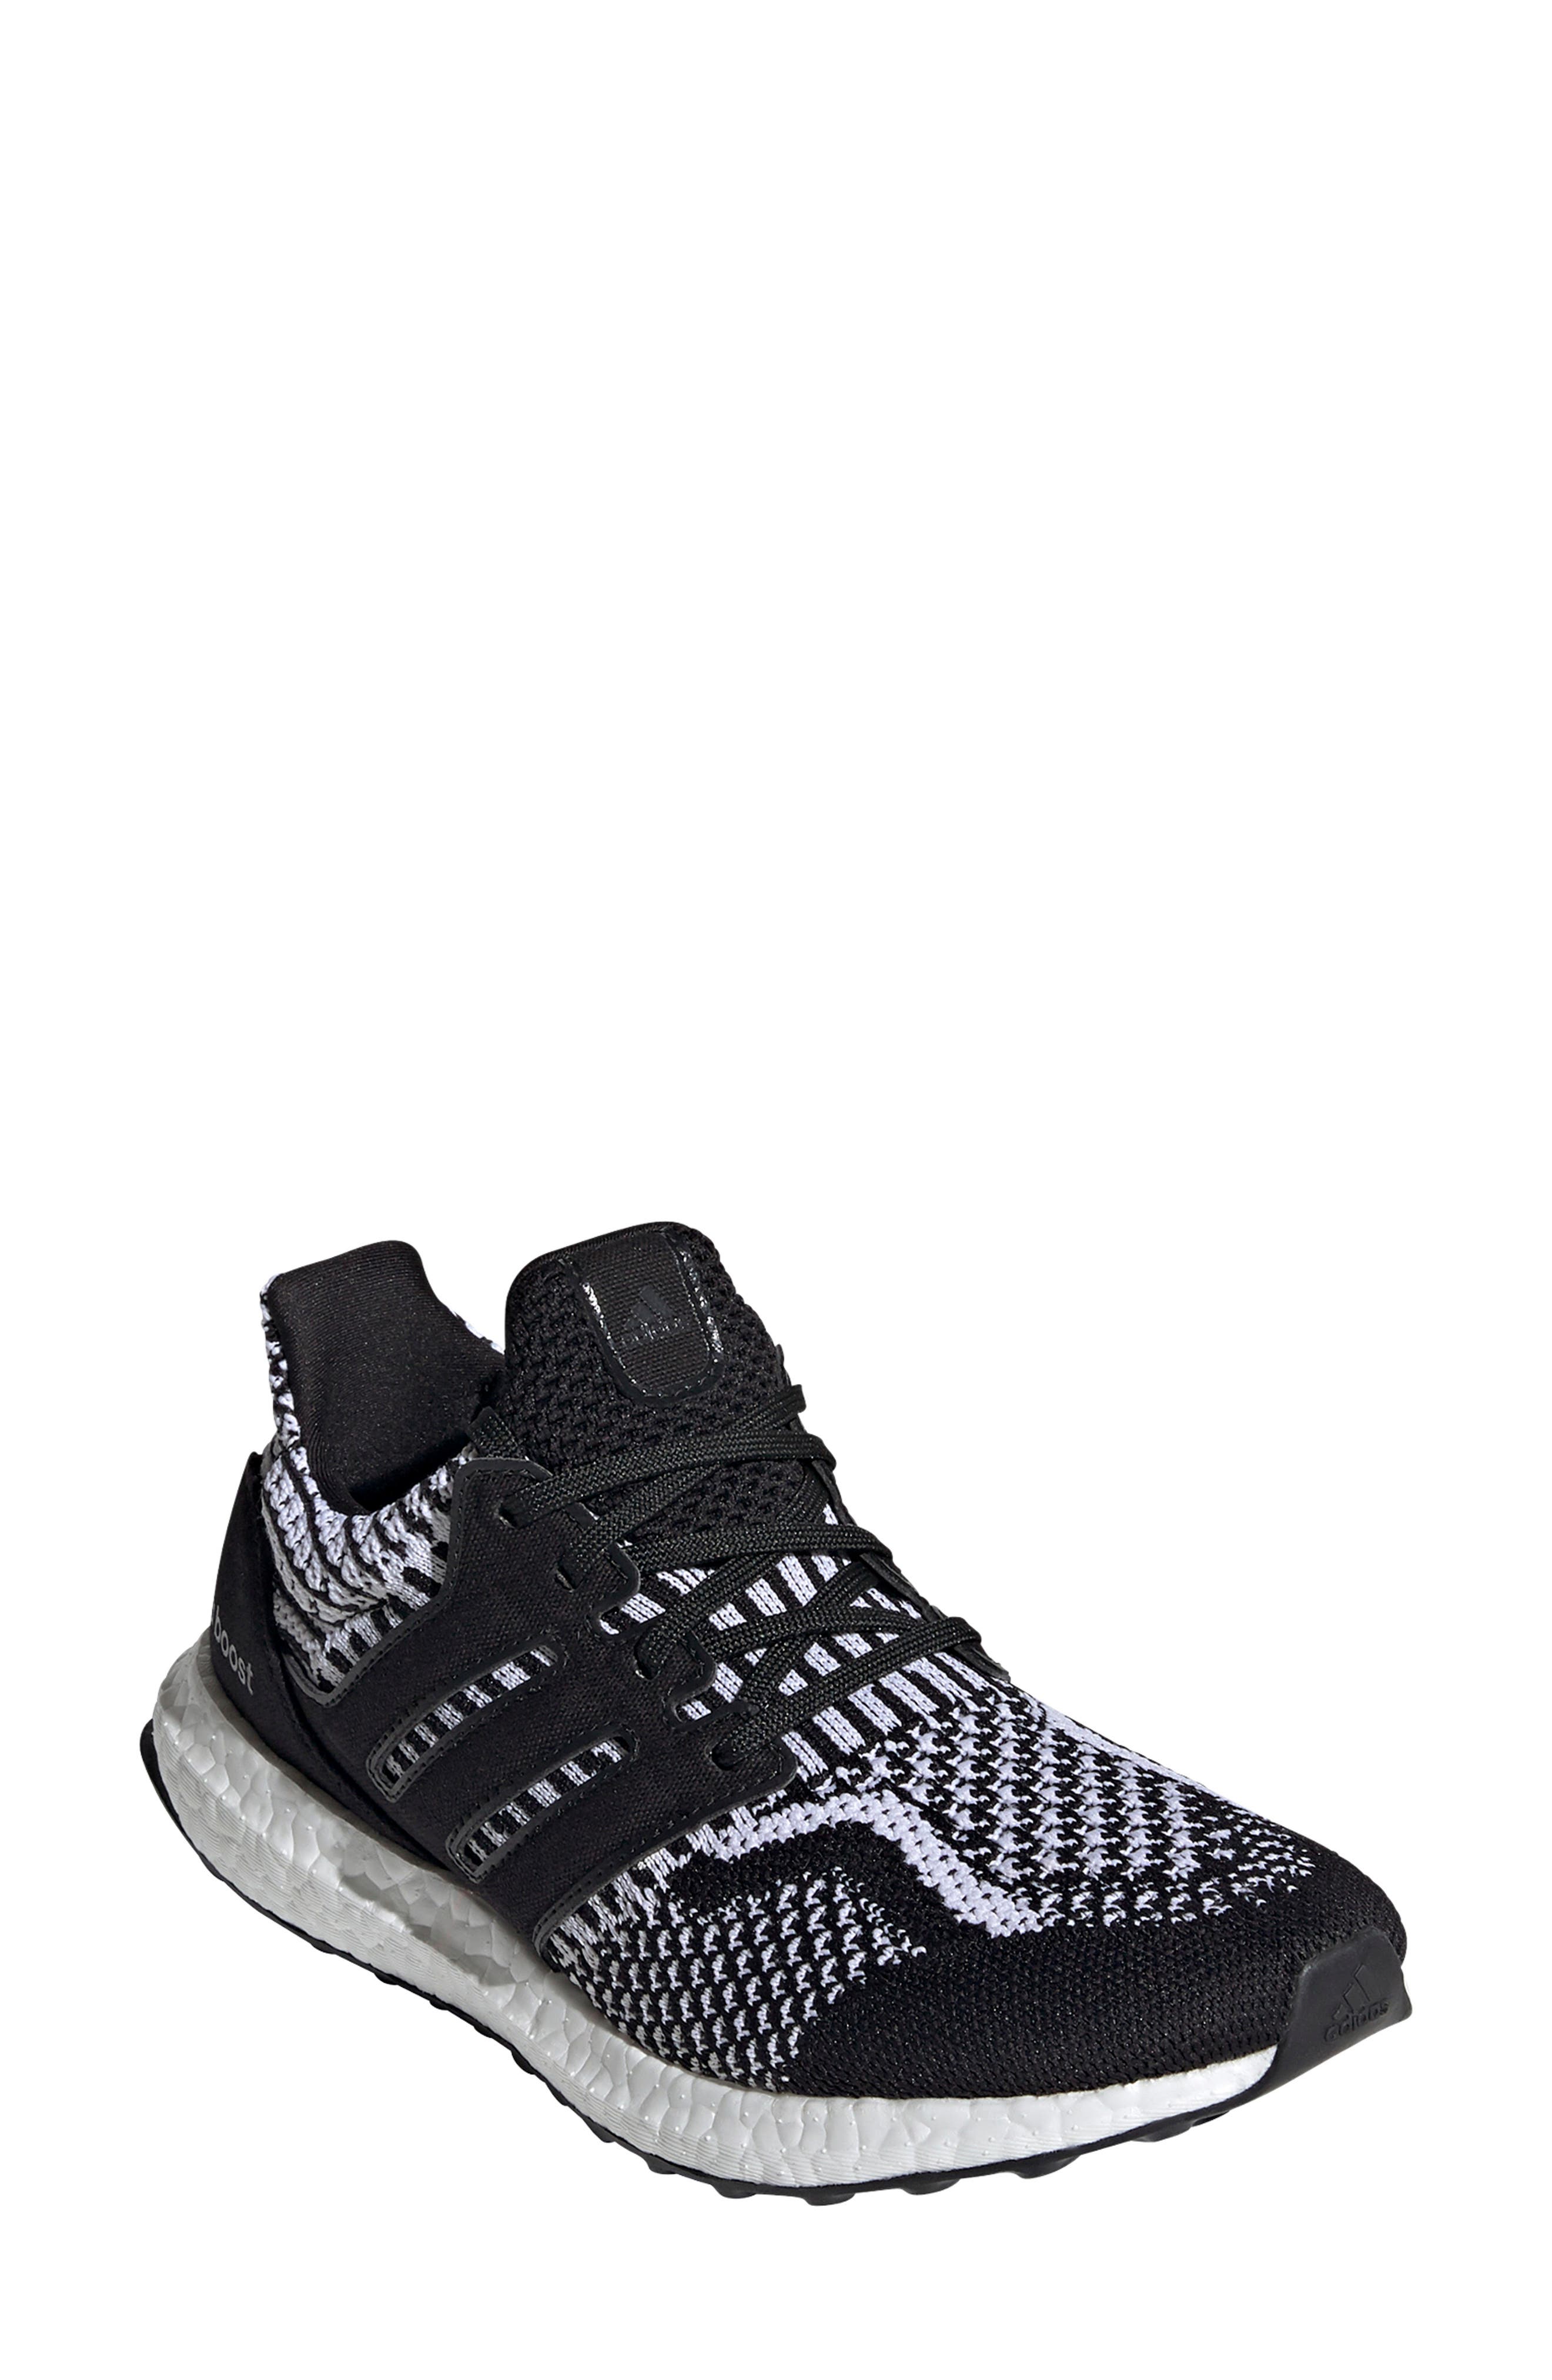 adidas ultra boost womens nordstrom